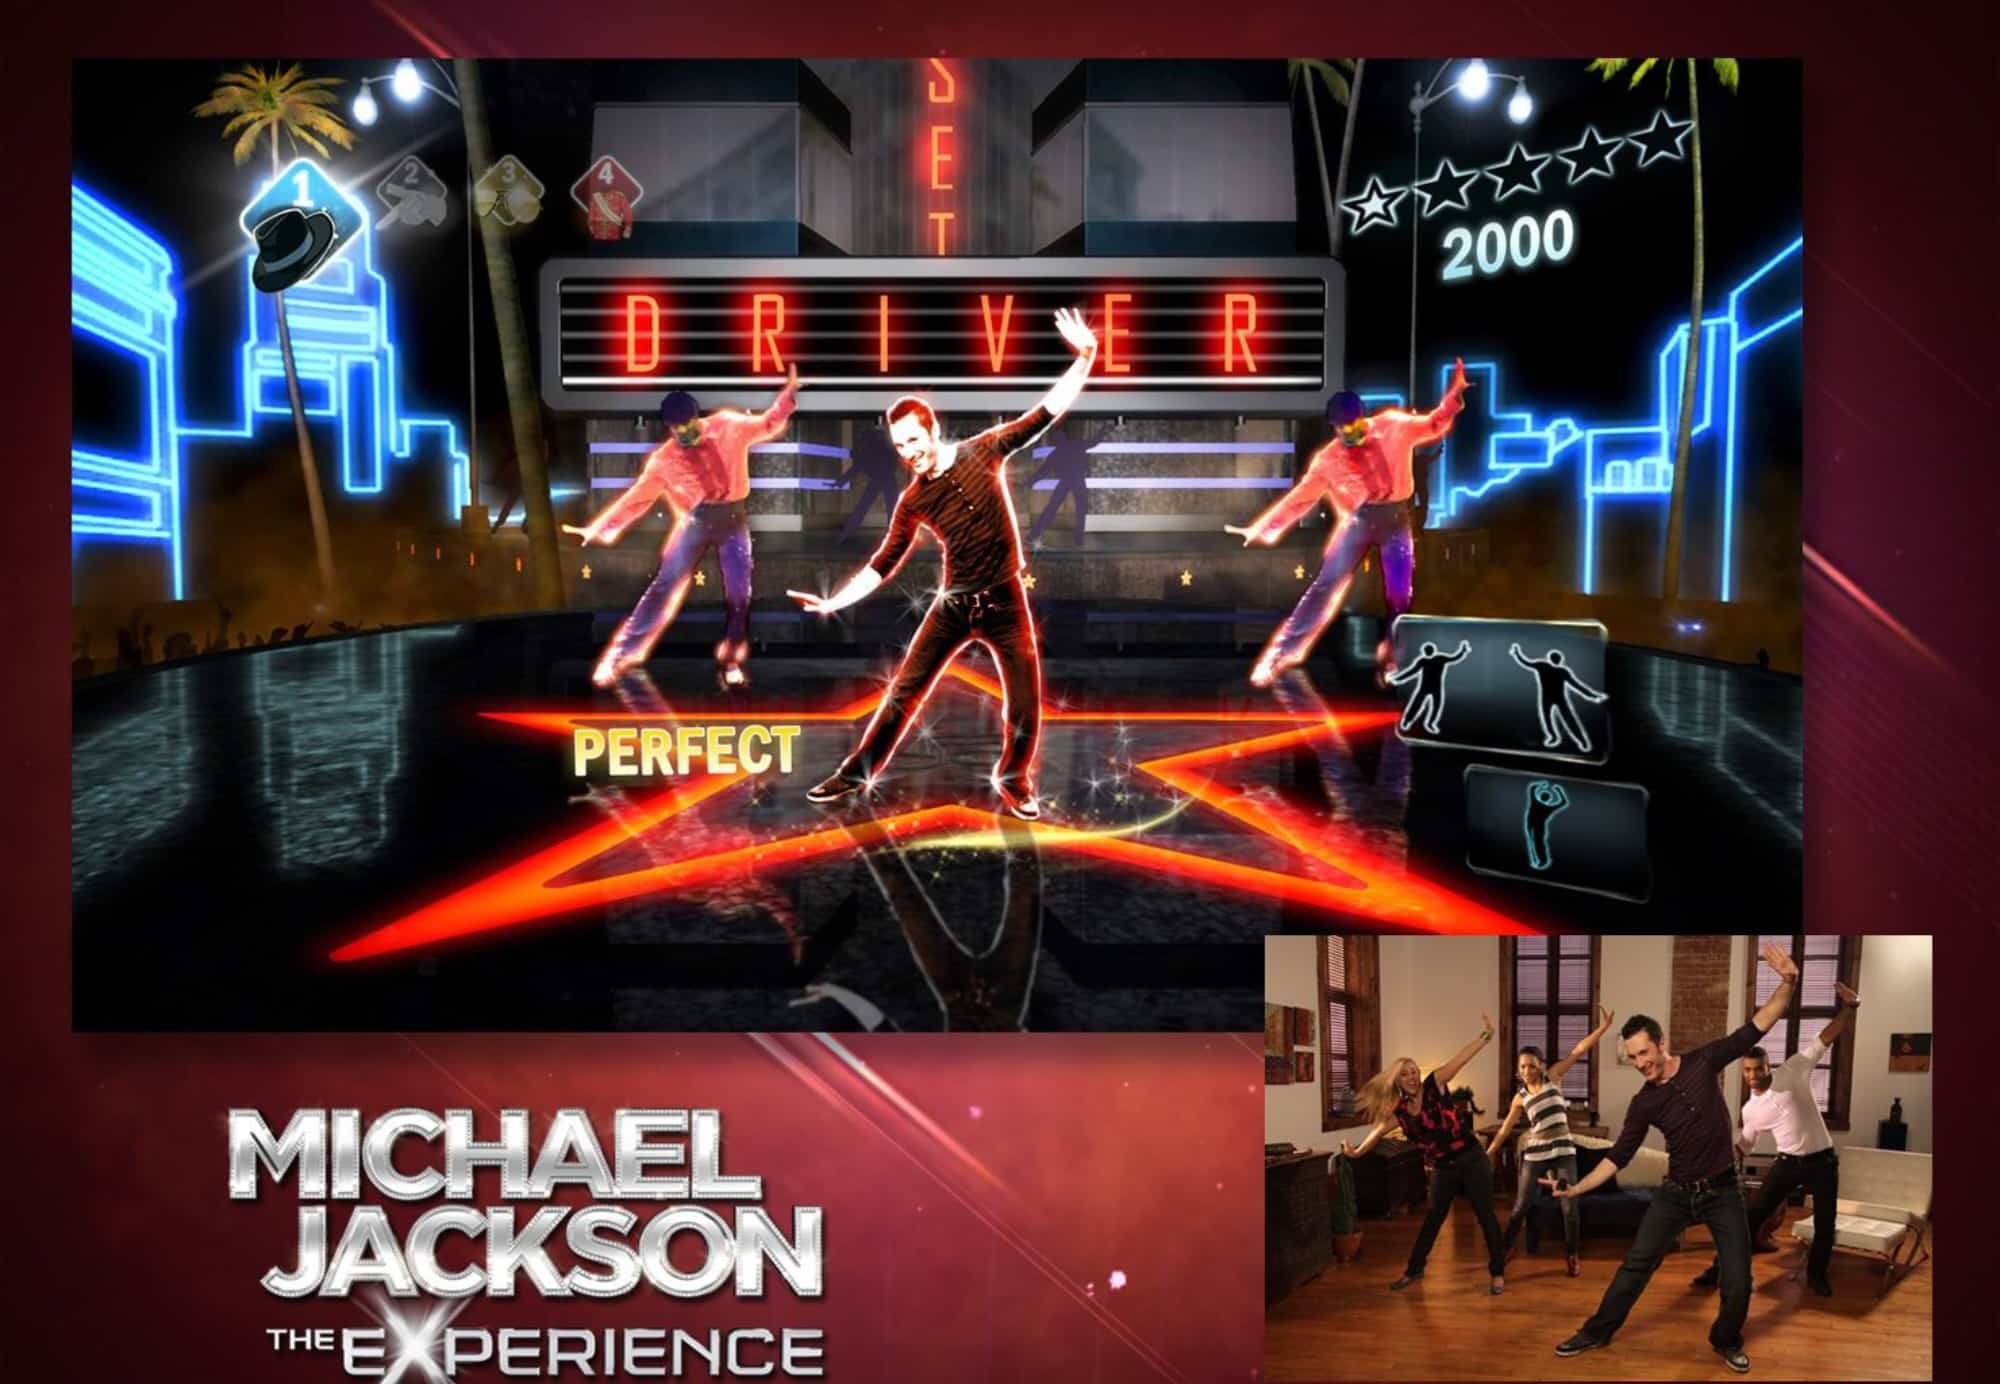 Michael Jackson: The Experience Achievements and Trophies list (Xbox 360, PS3)2000 x 1384